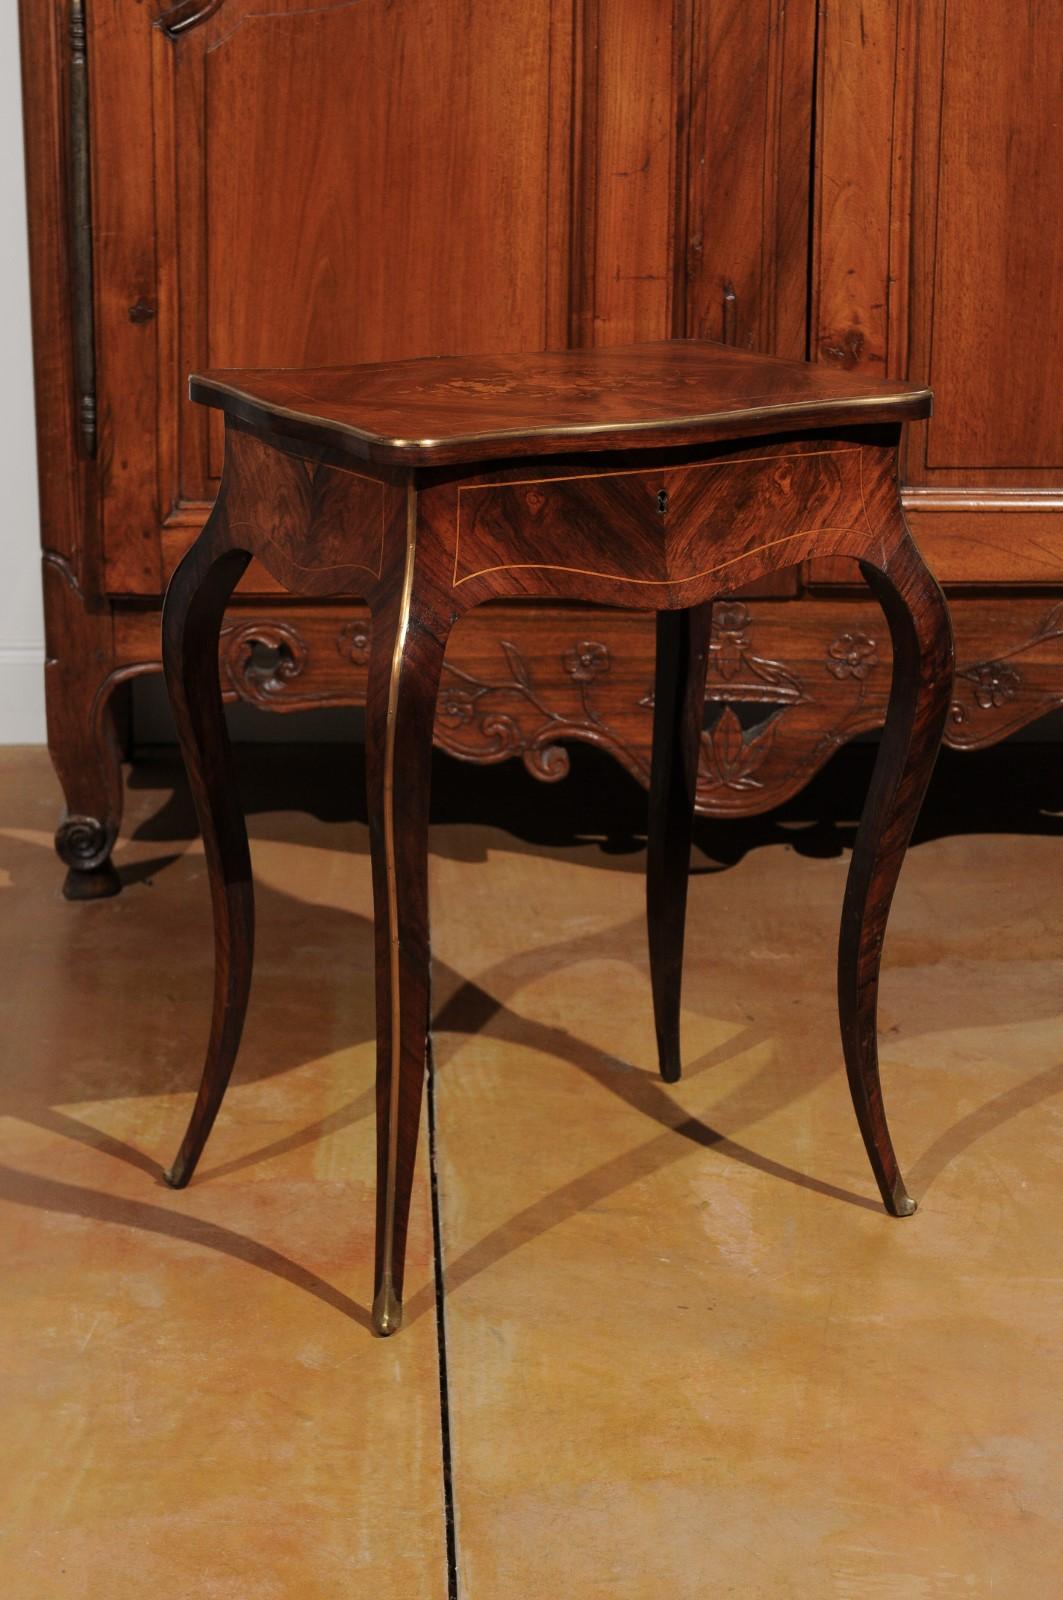 A French Louis XV style marquetry dressing table from the 19th century, with floral motifs and cabriole legs. Born in France during the 19th century, this exquisite marquetry table features the characteristics of the Louis XV era. The lovely top,